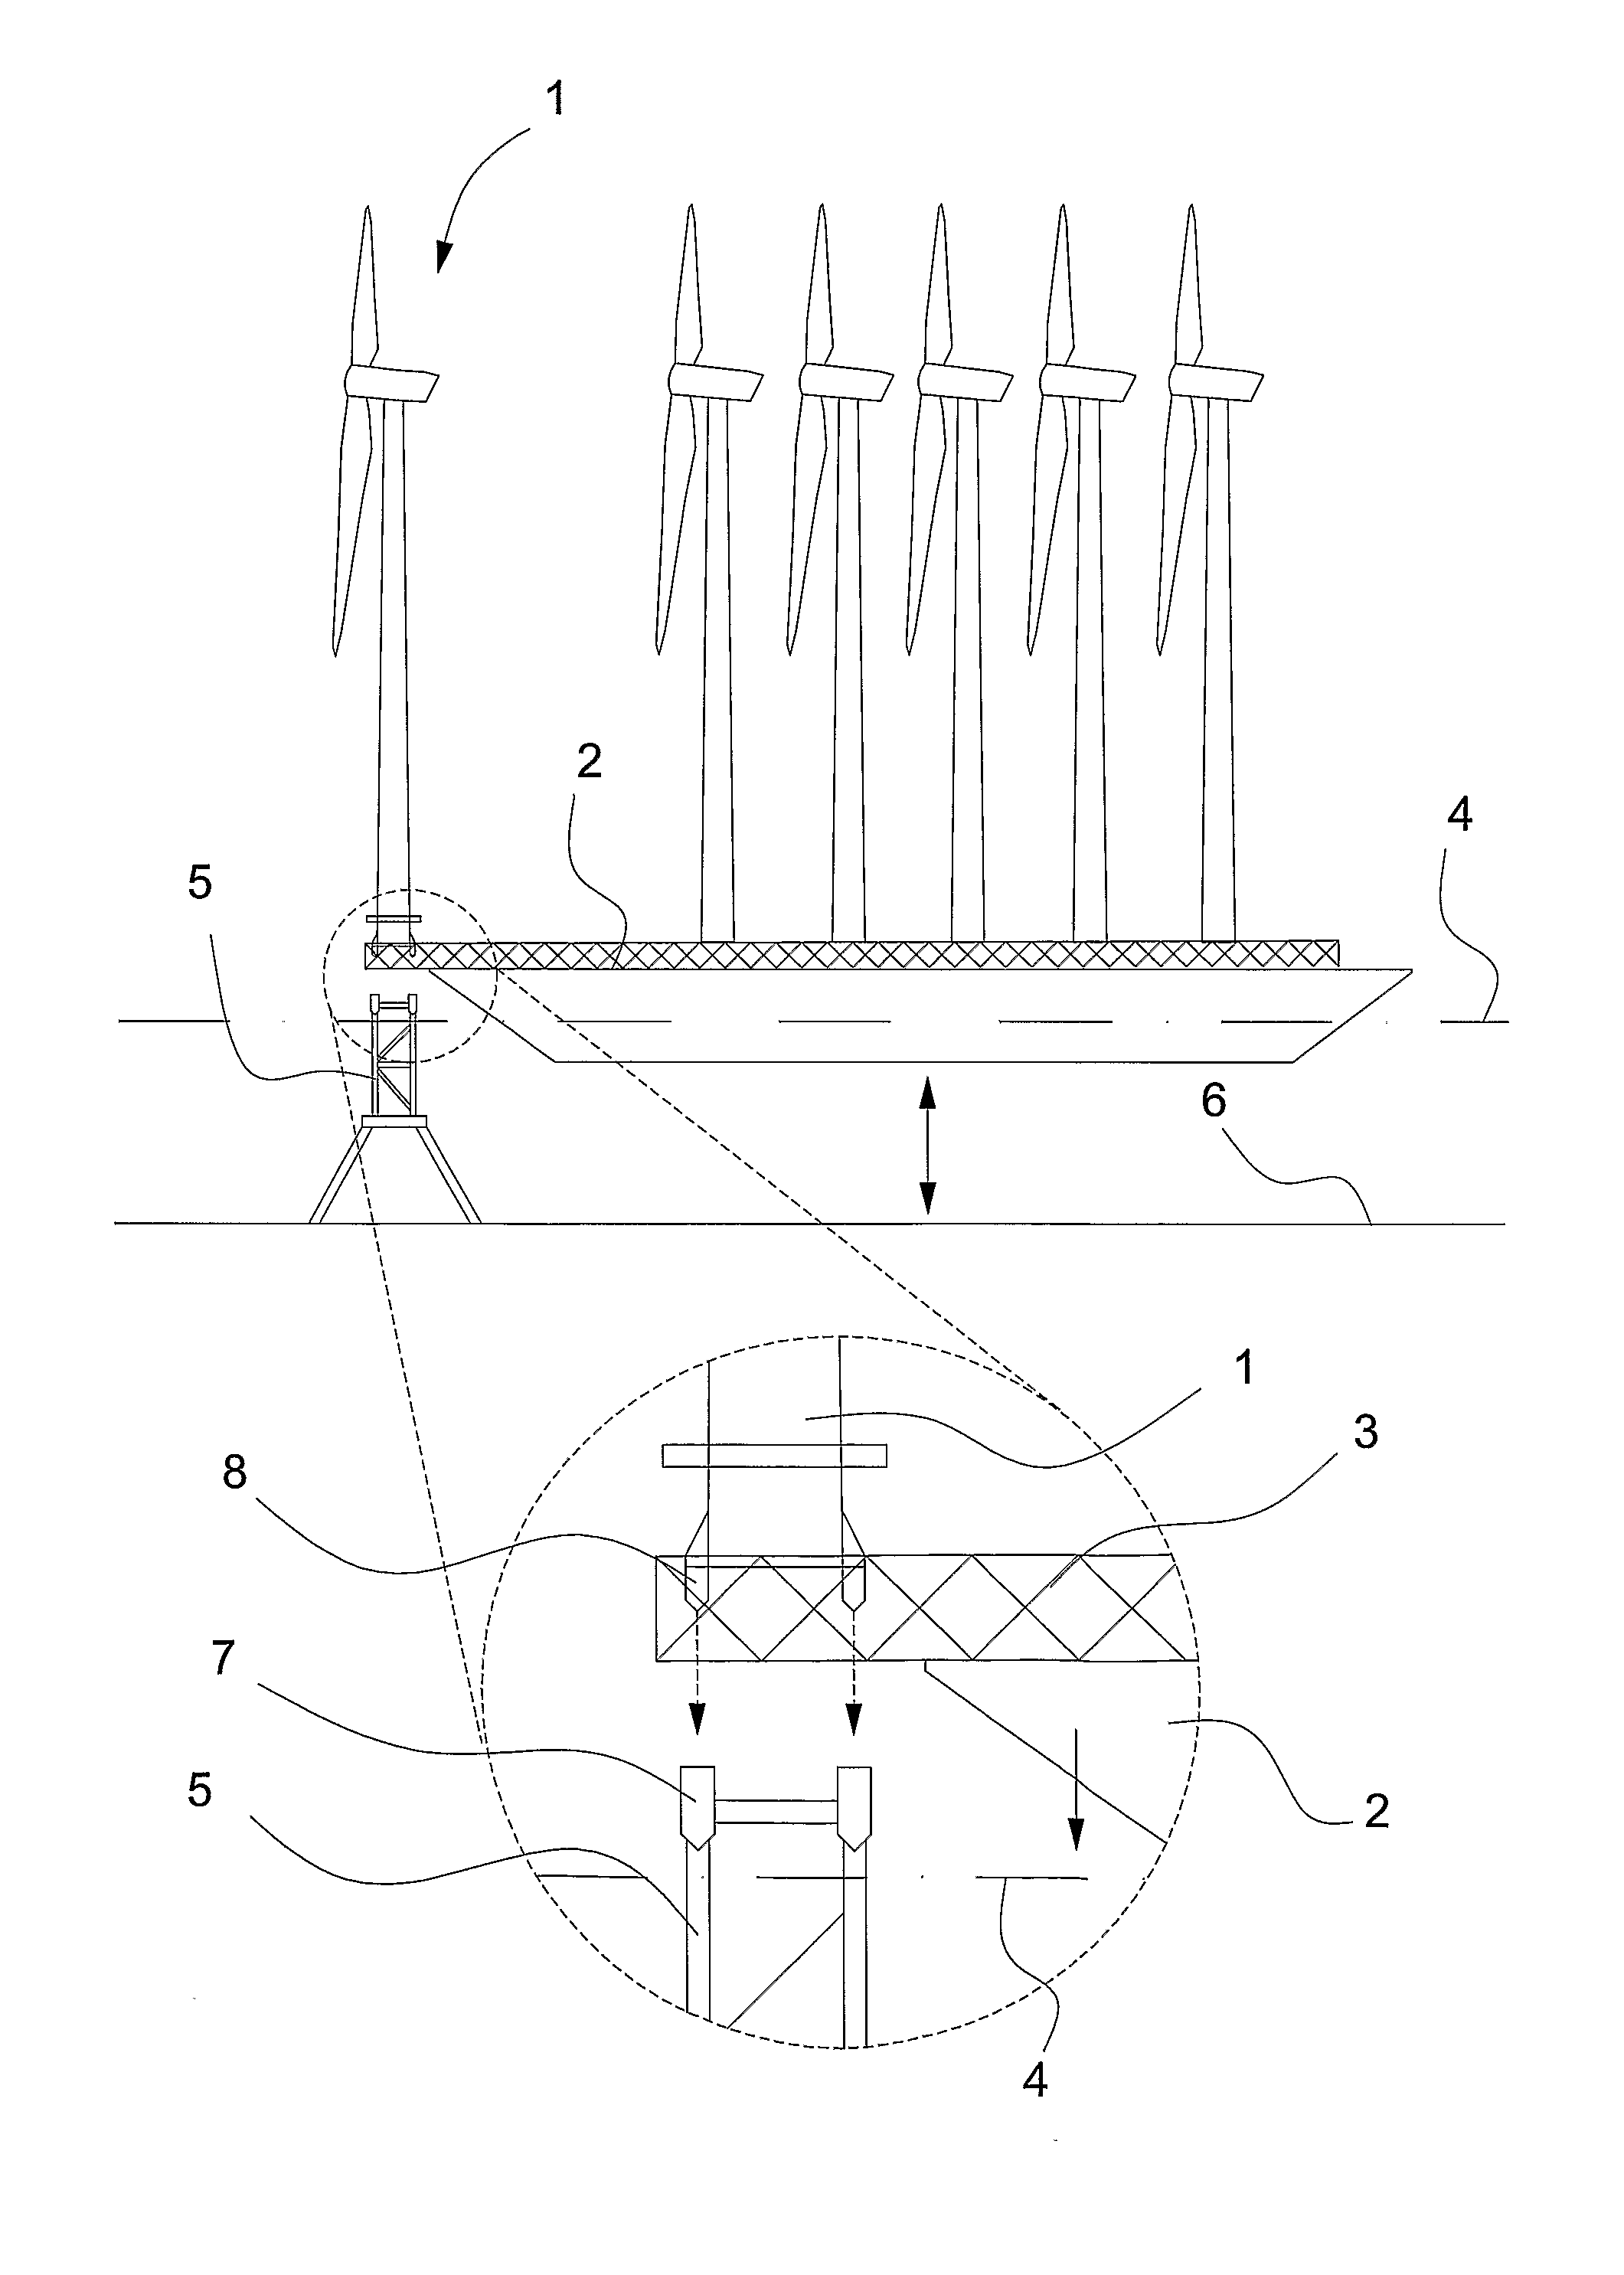 Method for installing an offshore wind turbine and a barge system